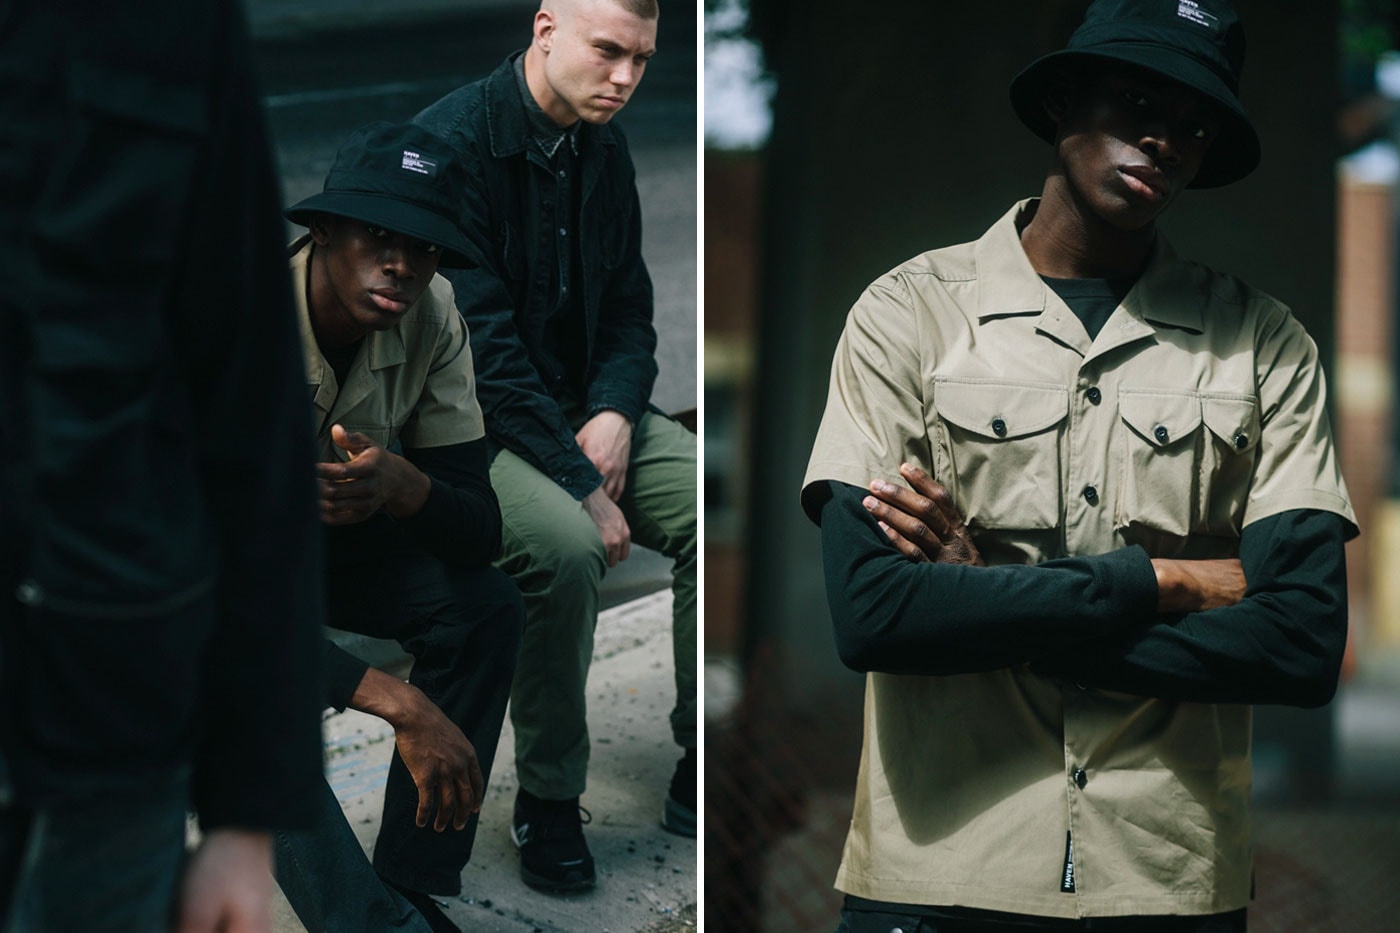 HAVEN Spring Summer 2019 Editorial Lookbook delivery 2 ss19 collection range retailer boutique in-house brand imprint military functional vest tactical jackets Canadian Military OG 107 Combat Coat COOLMAX® service pants bdus cargos 